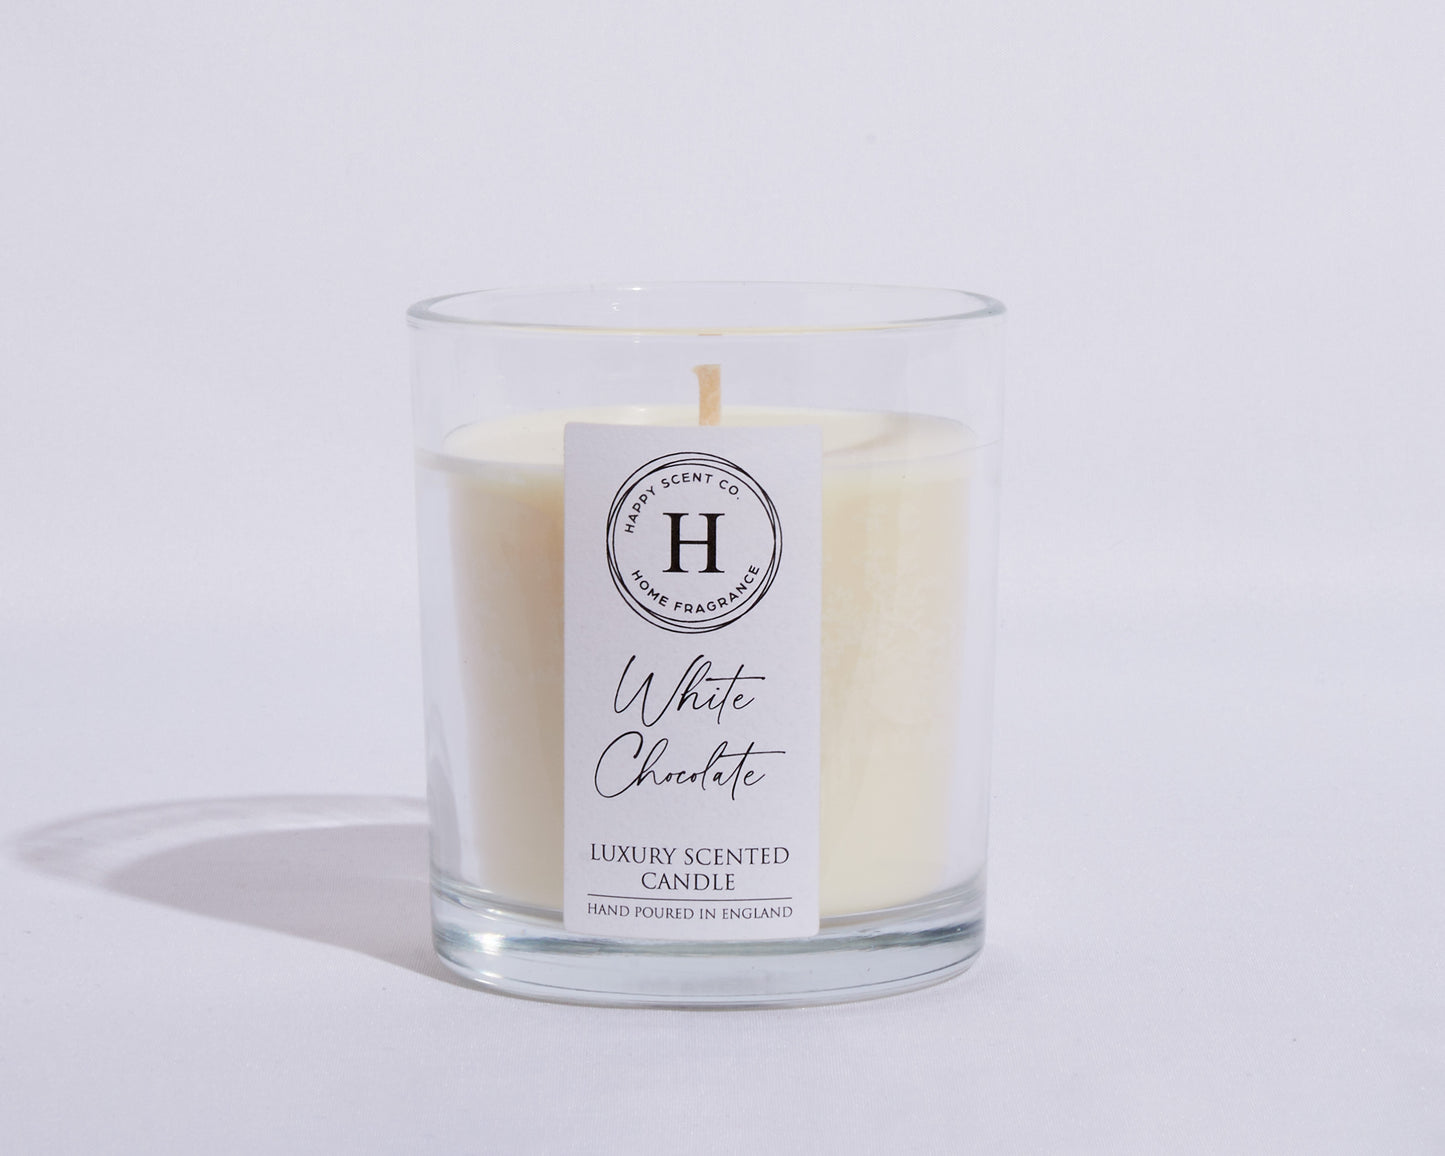 White Chocolate Luxury Scented Candle - By Happy Scent Co